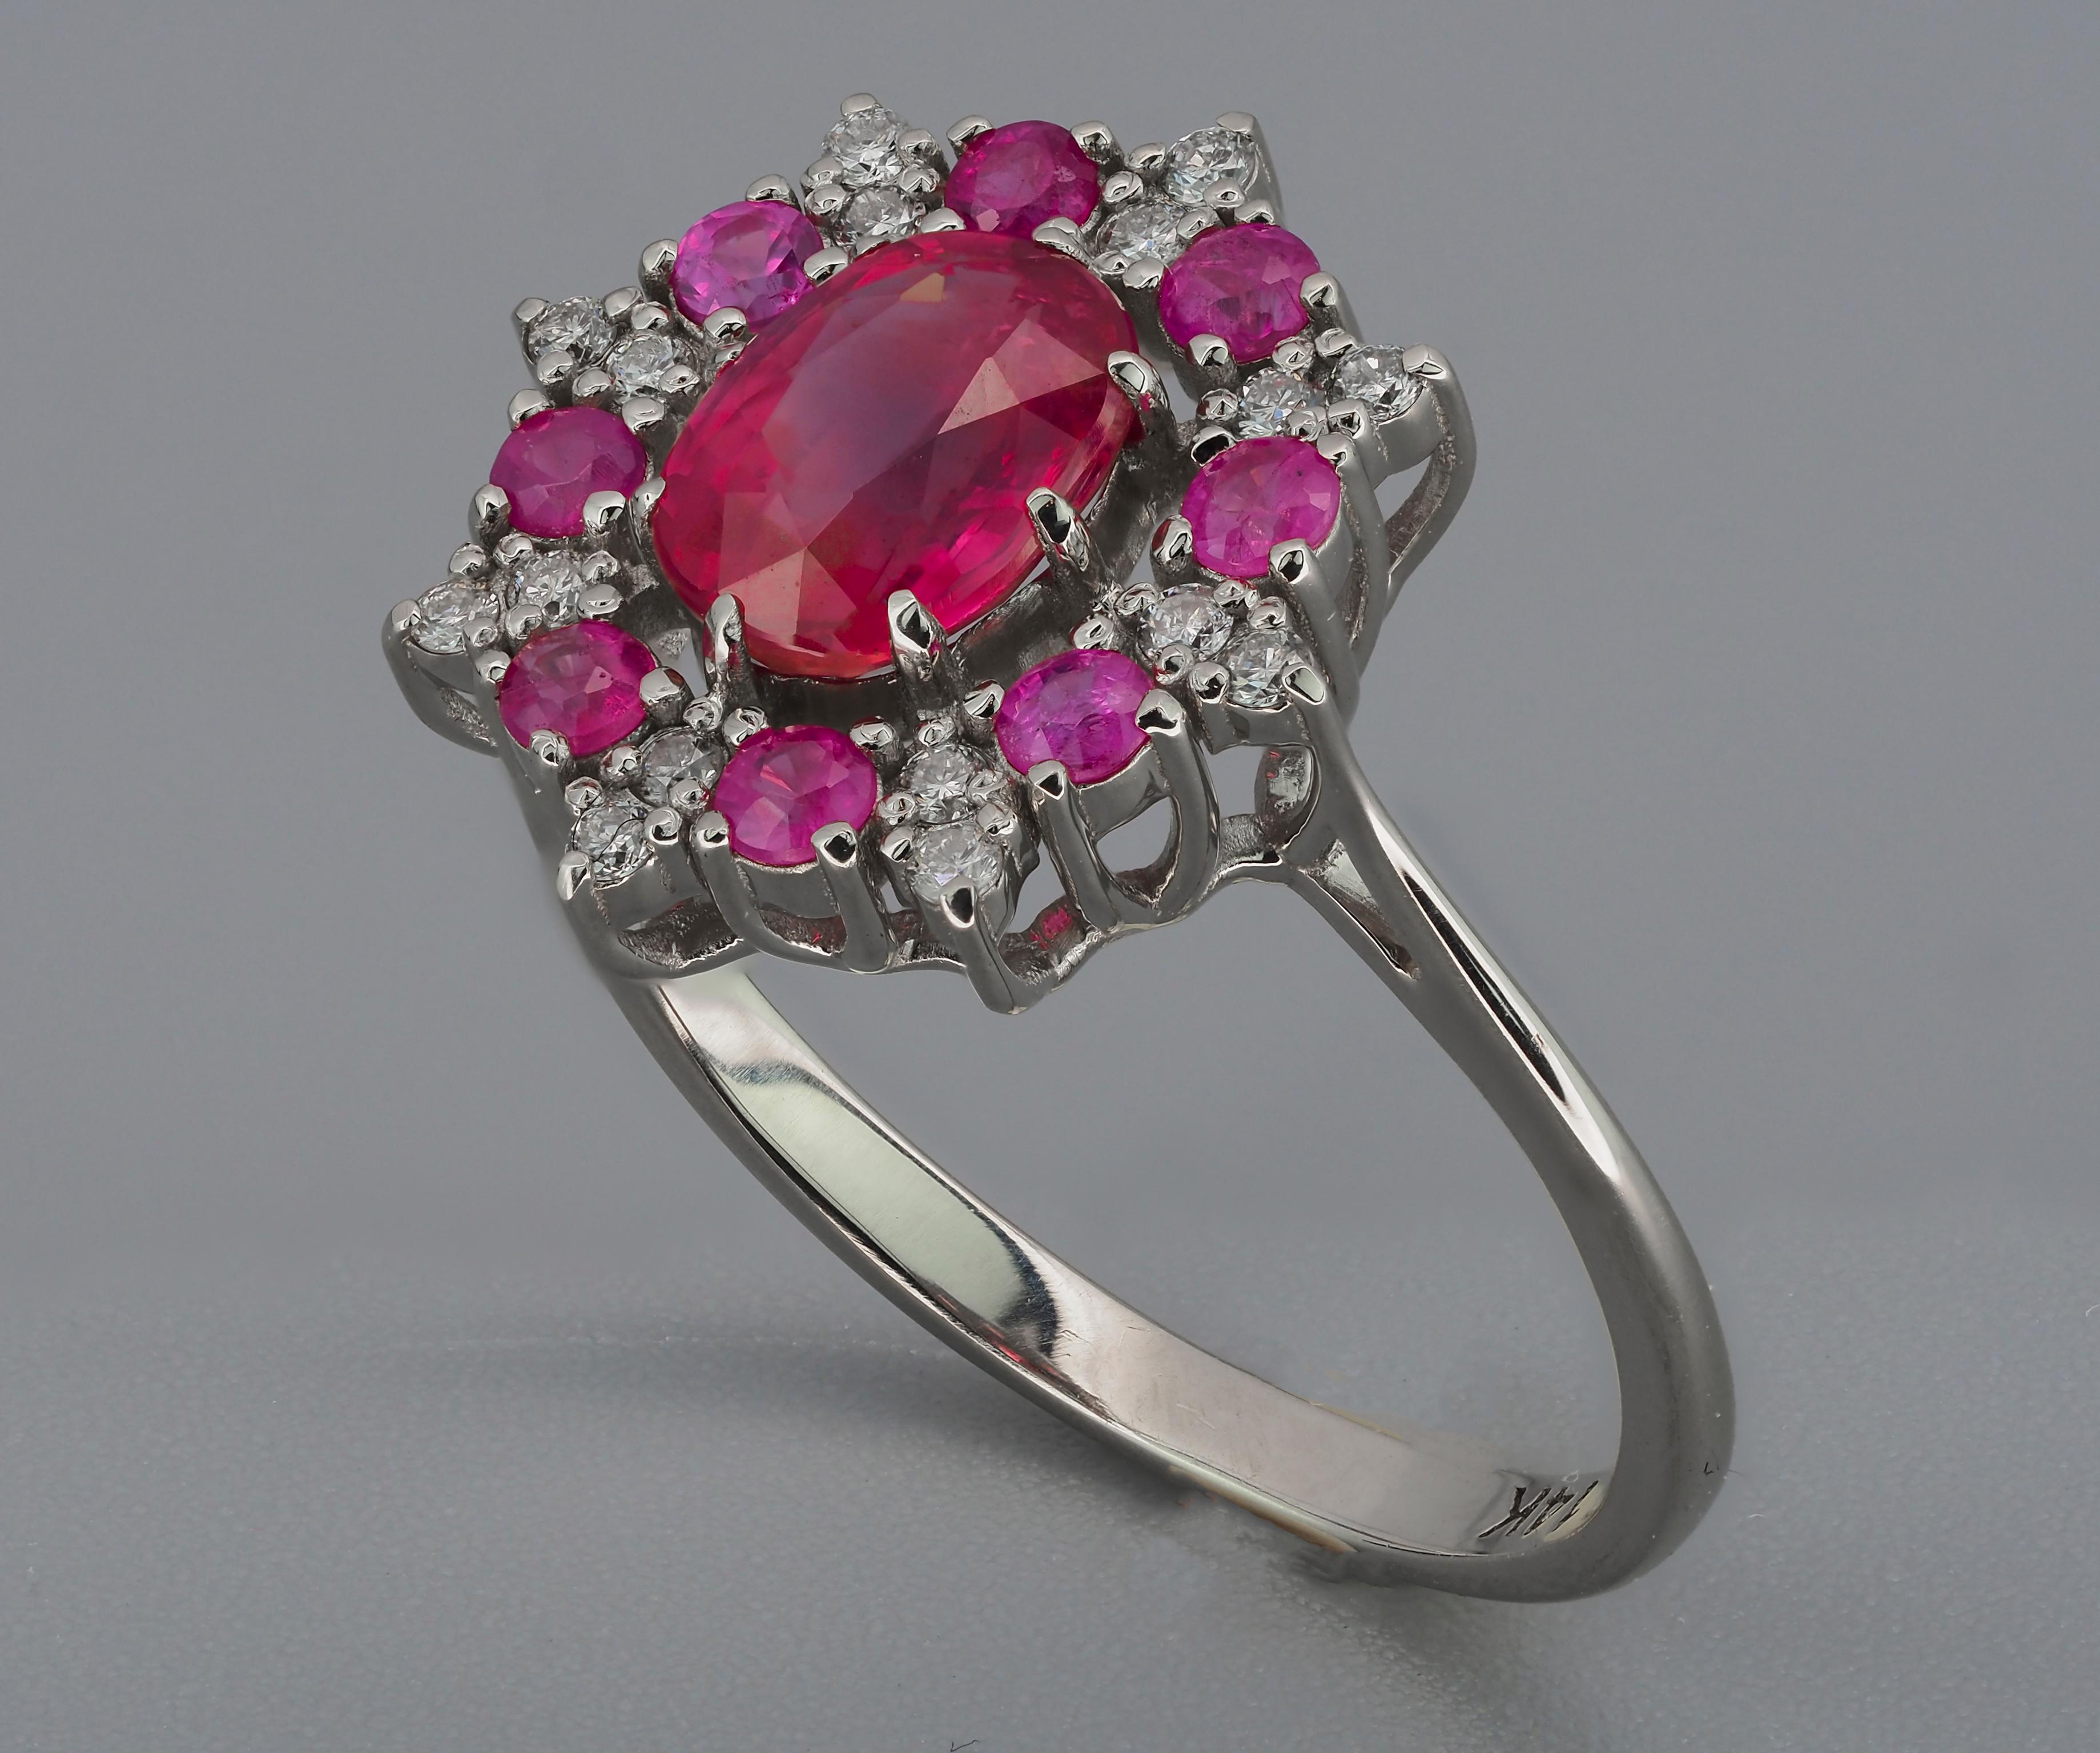 For Sale:  14 karat Gold Ring with Ruby and Diamonds. Snowflake Gold Ring 9